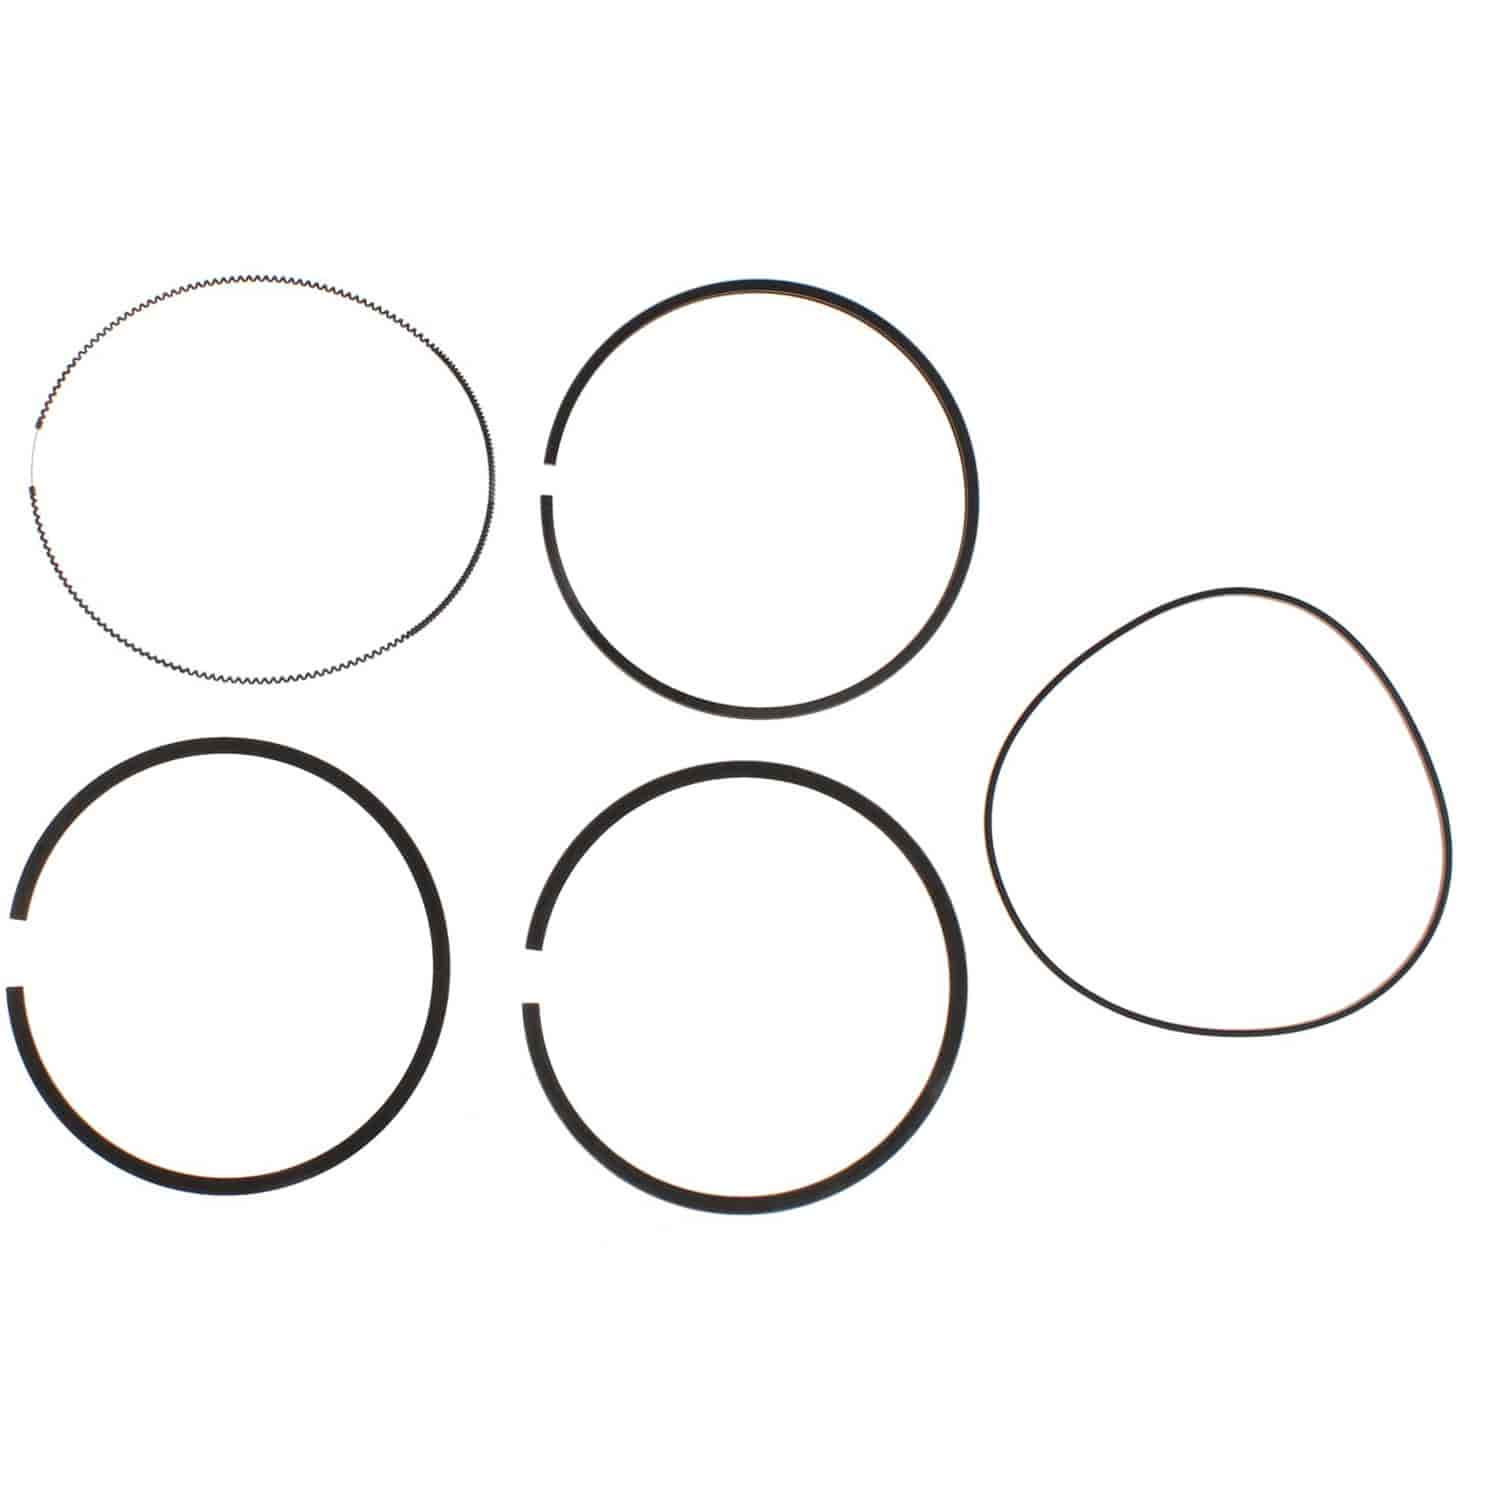 Sleeve Assembly Ring Set for Cummins New C 505 8.3L 6CTA Eng. 6 Cyl. 4.488